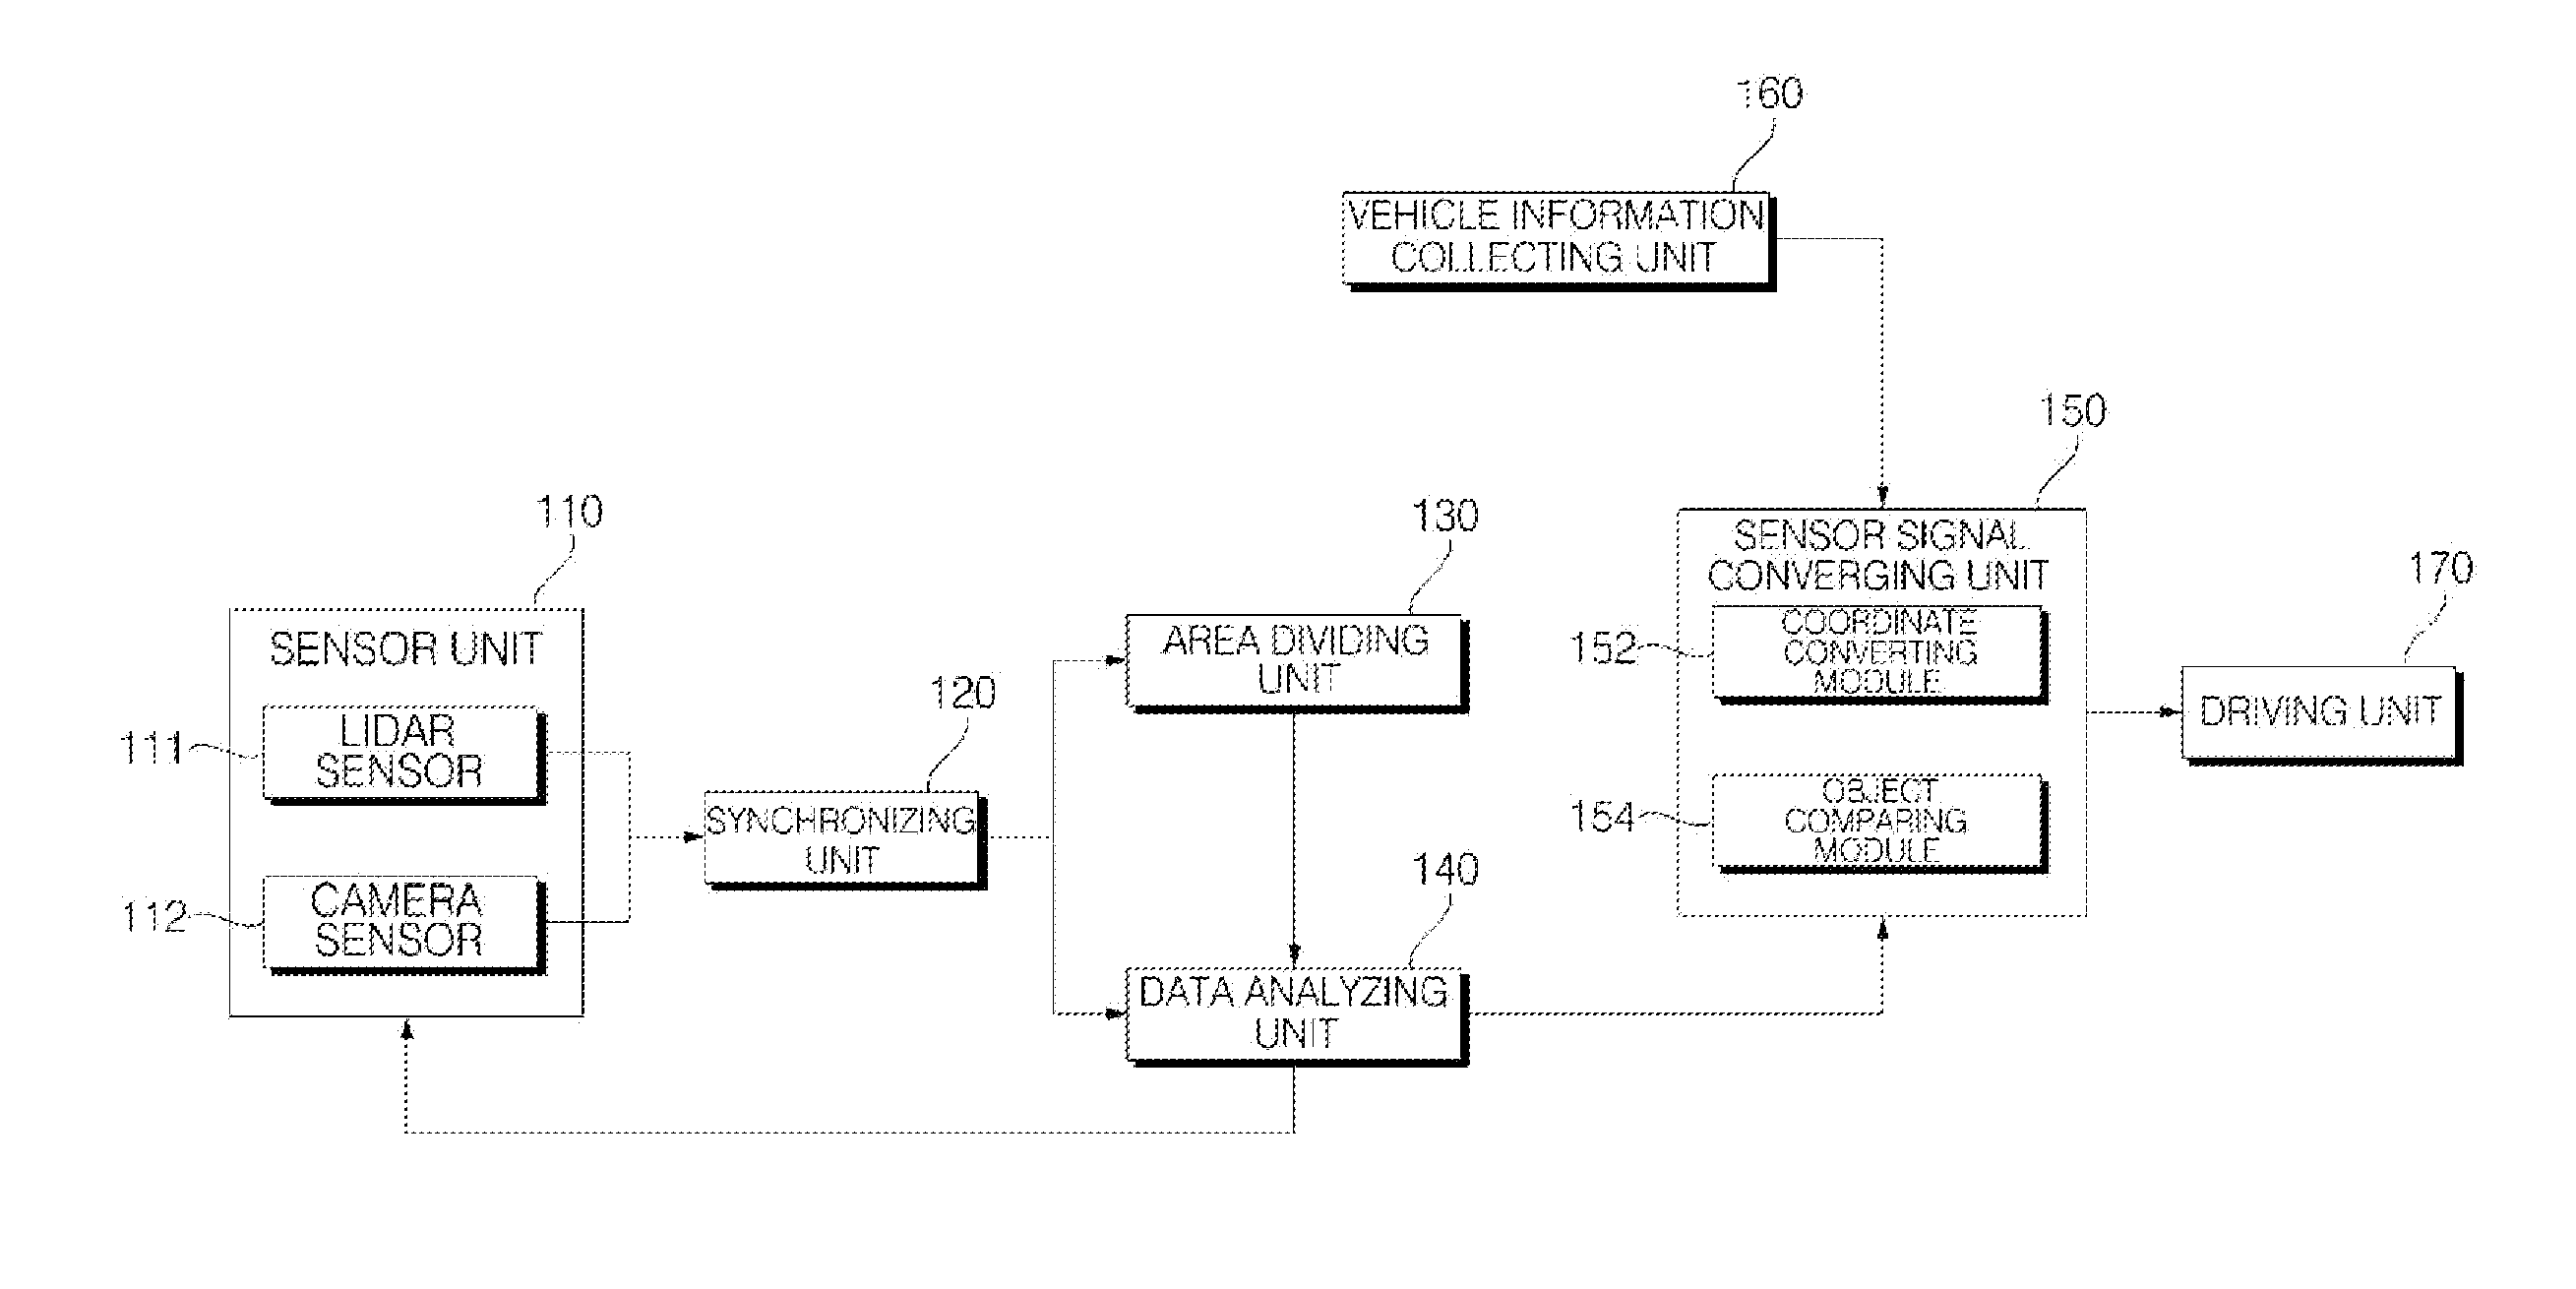 Object detecting apparatus, and method of operating the same